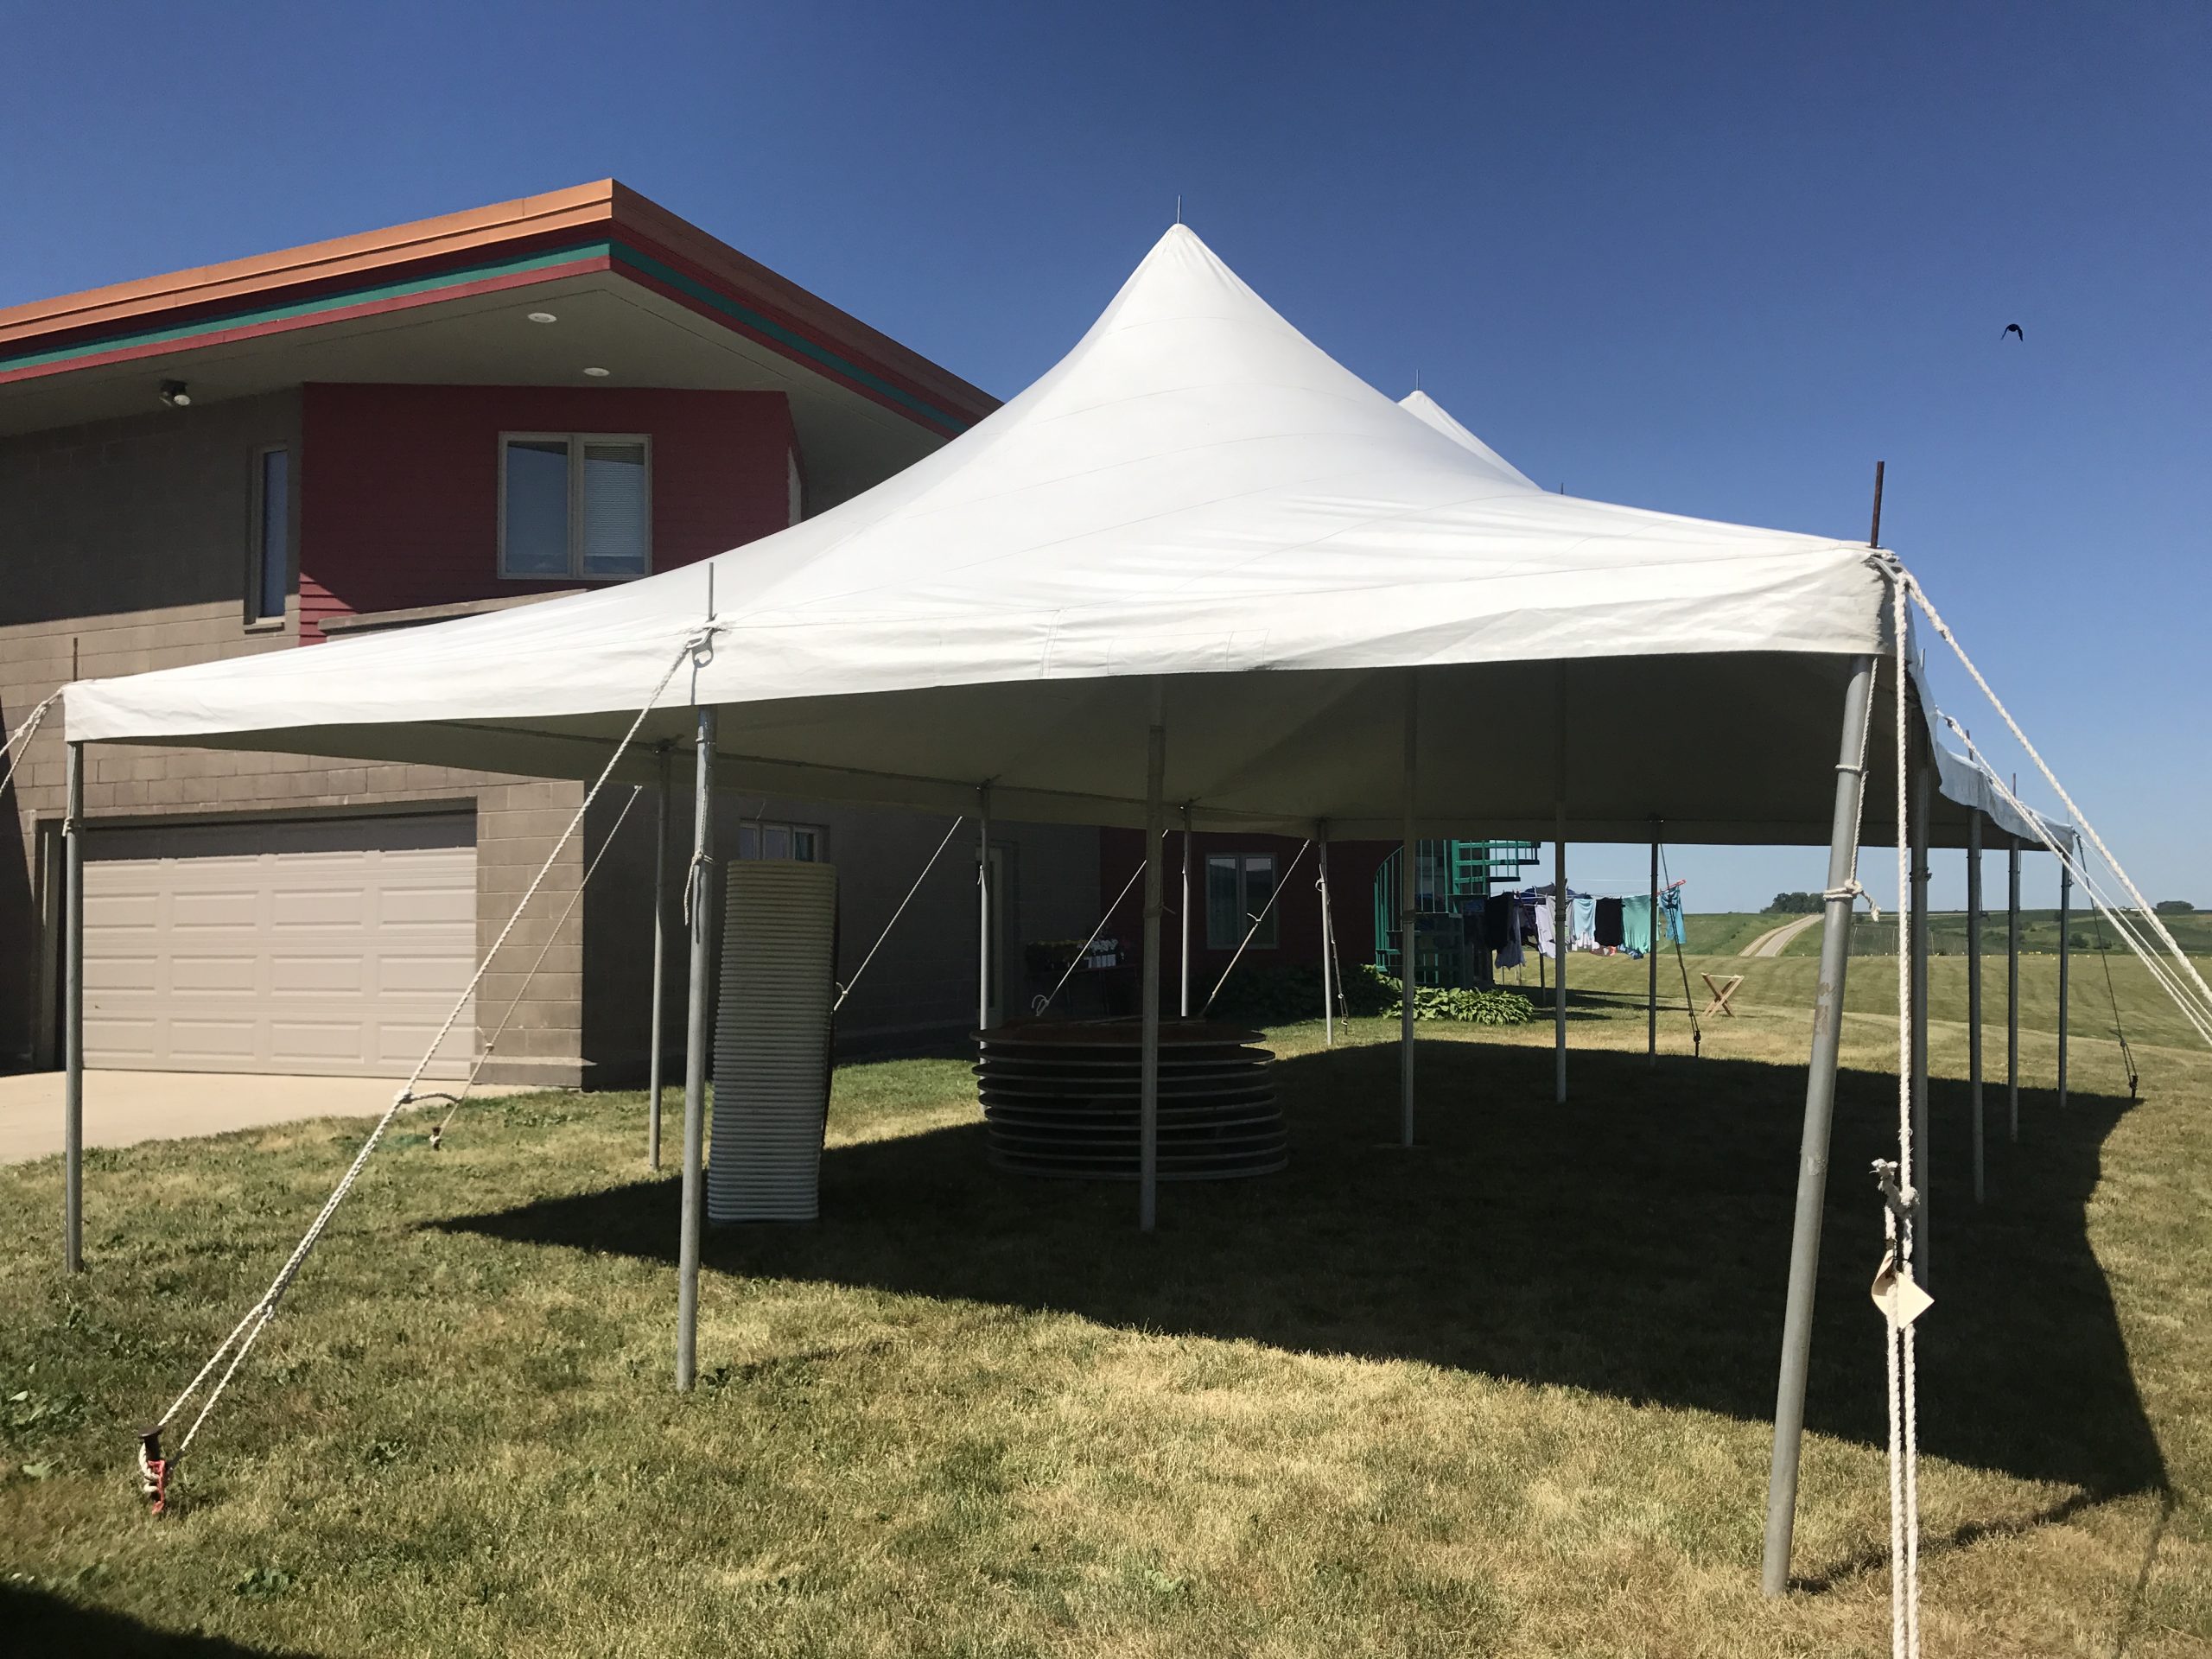 20' x 40' rope and pole tent for a Home Outdoor Wedding Reception Tent in Grinnell, Iowa